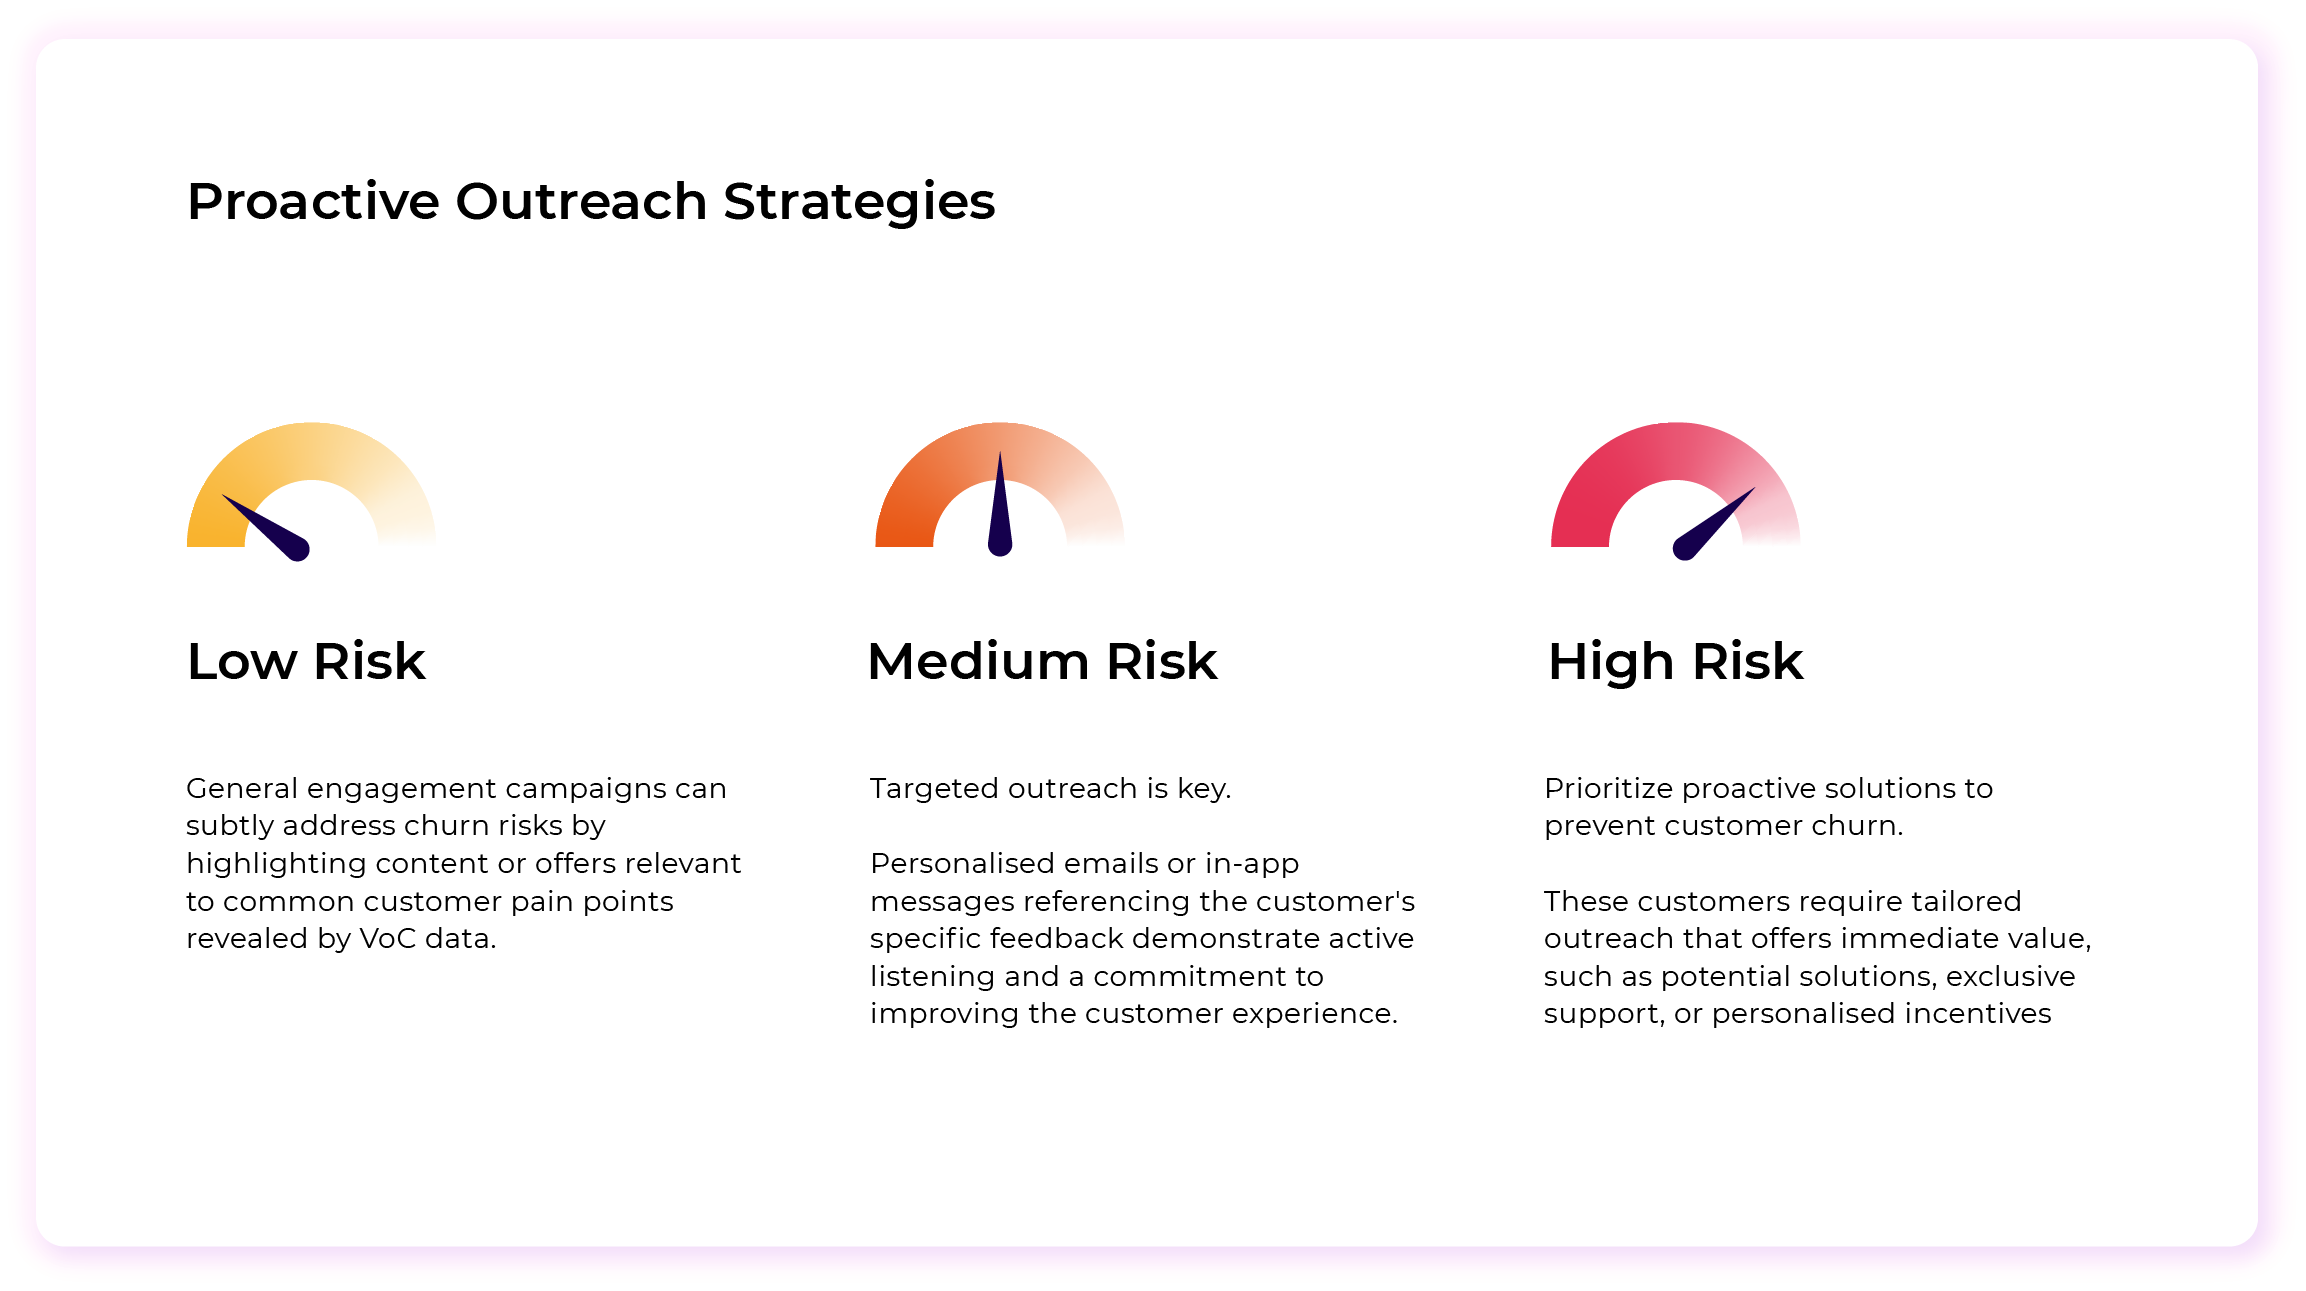 Three levels of risk with proactive outreach strategy example for each level